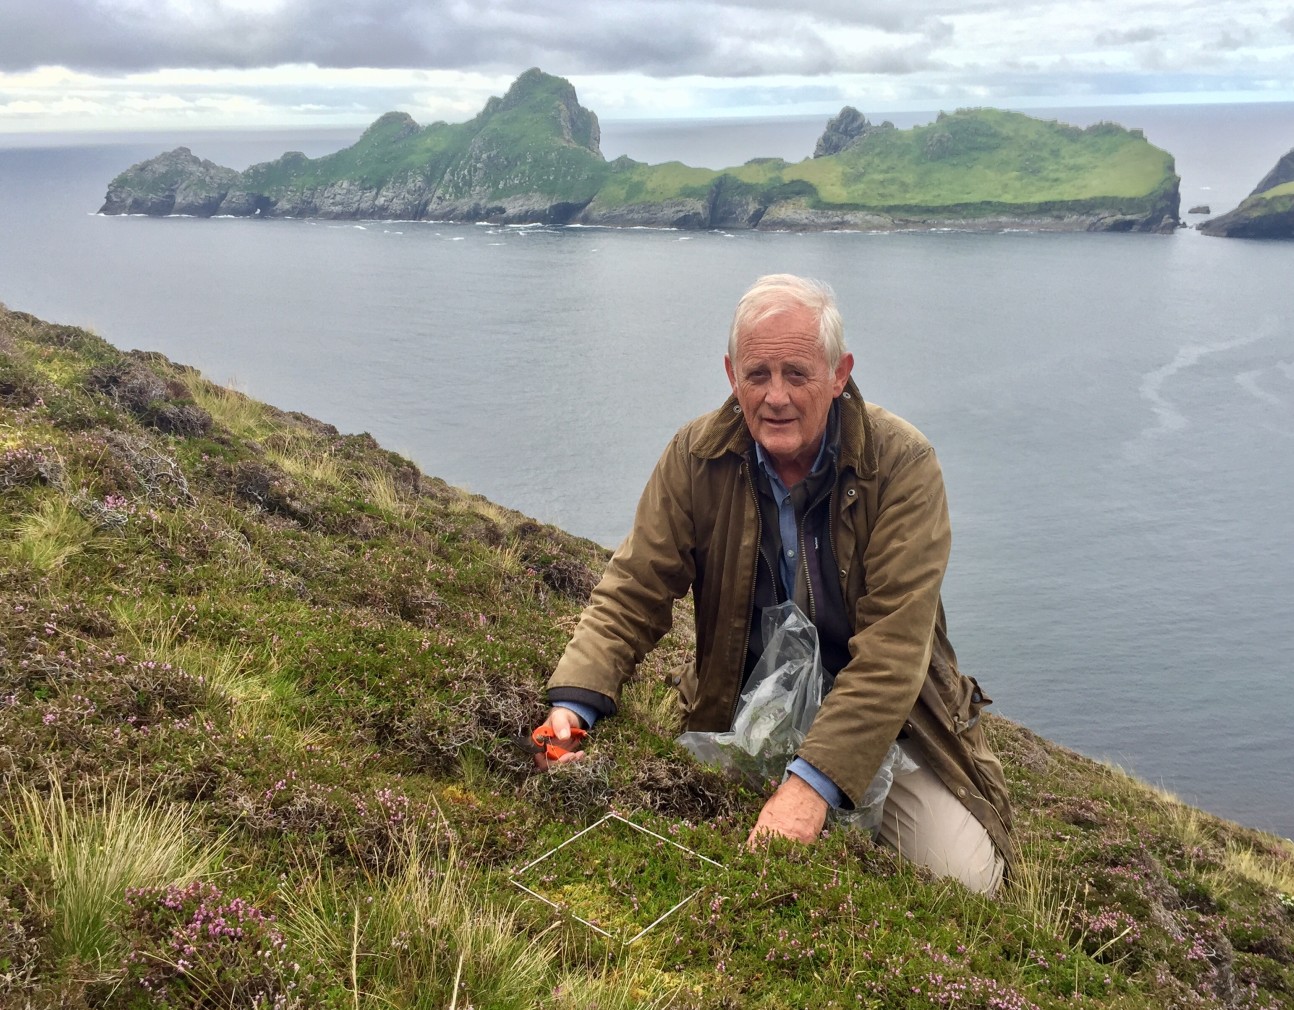 Mick Crawley sampling vegetation on a cliff by the sea